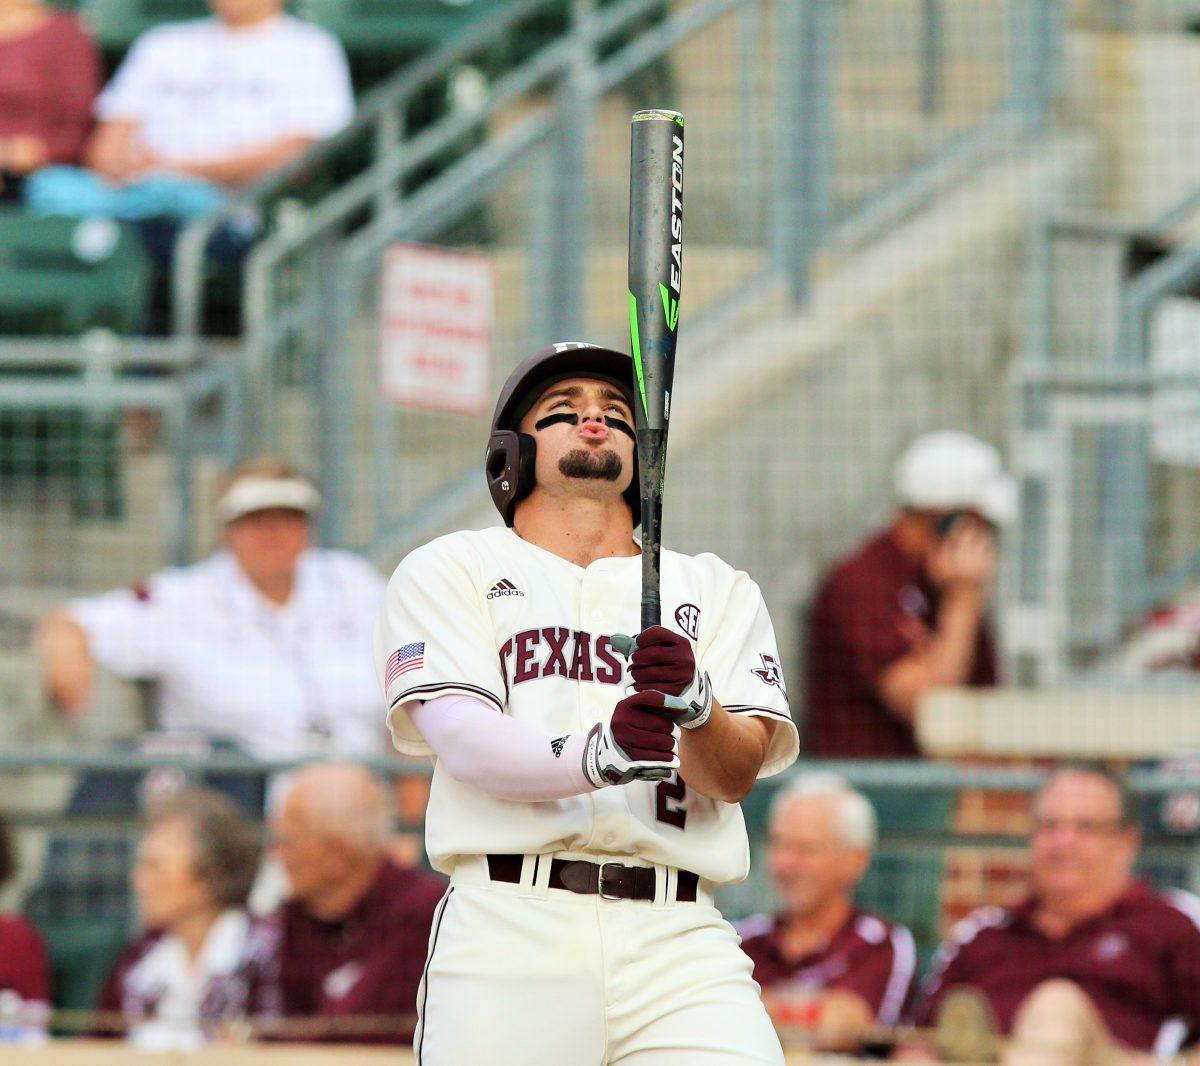 Ryne+Birk+hit+his+fourth+home+run+of+the+season+and+scored+three+runs+for+the+Aggies+in+their+sweep+of+Georgia.